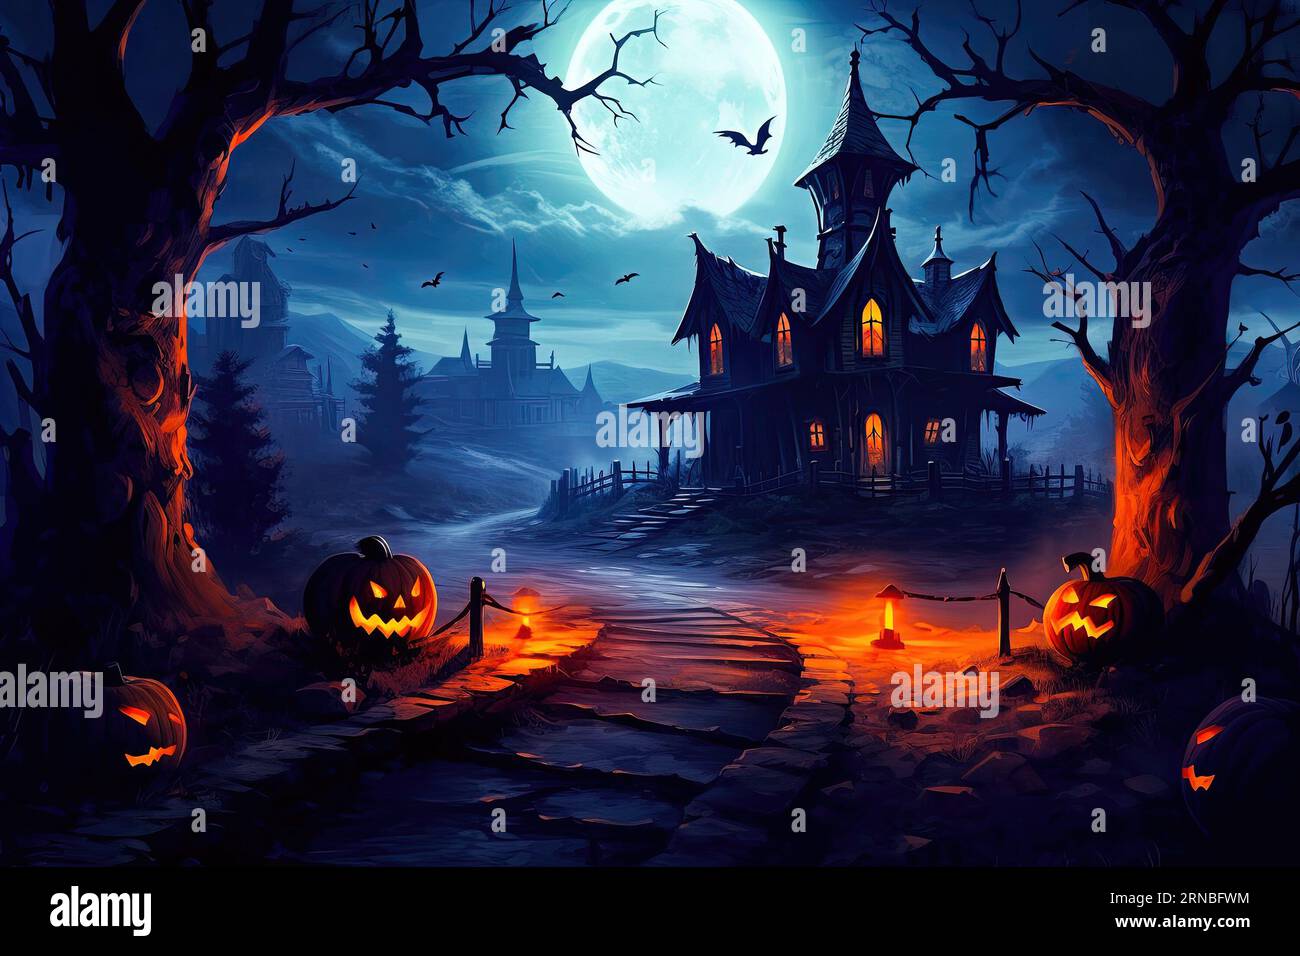 Halloween background with big moon, old house, pumpkins Stock Photo